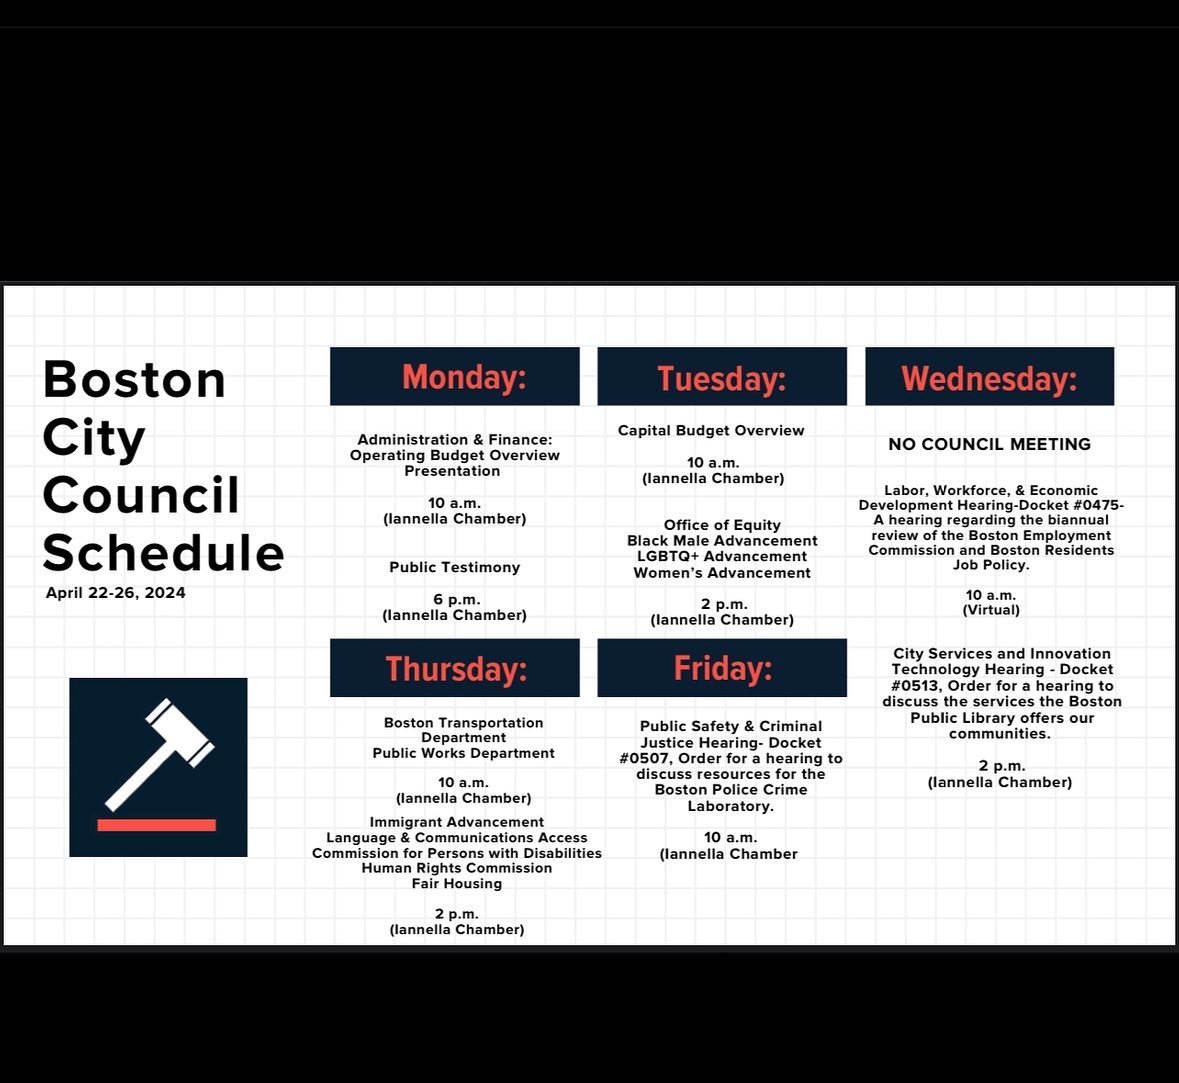 📣 💴 Budget season starts today! Here is this week&rsquo;s schedule for the @bostoncitycouncil. There will be no council meeting on Wednesday, but there are hearings every day and tonight we&rsquo;ll be hearing public testimony on the budget. 

We w